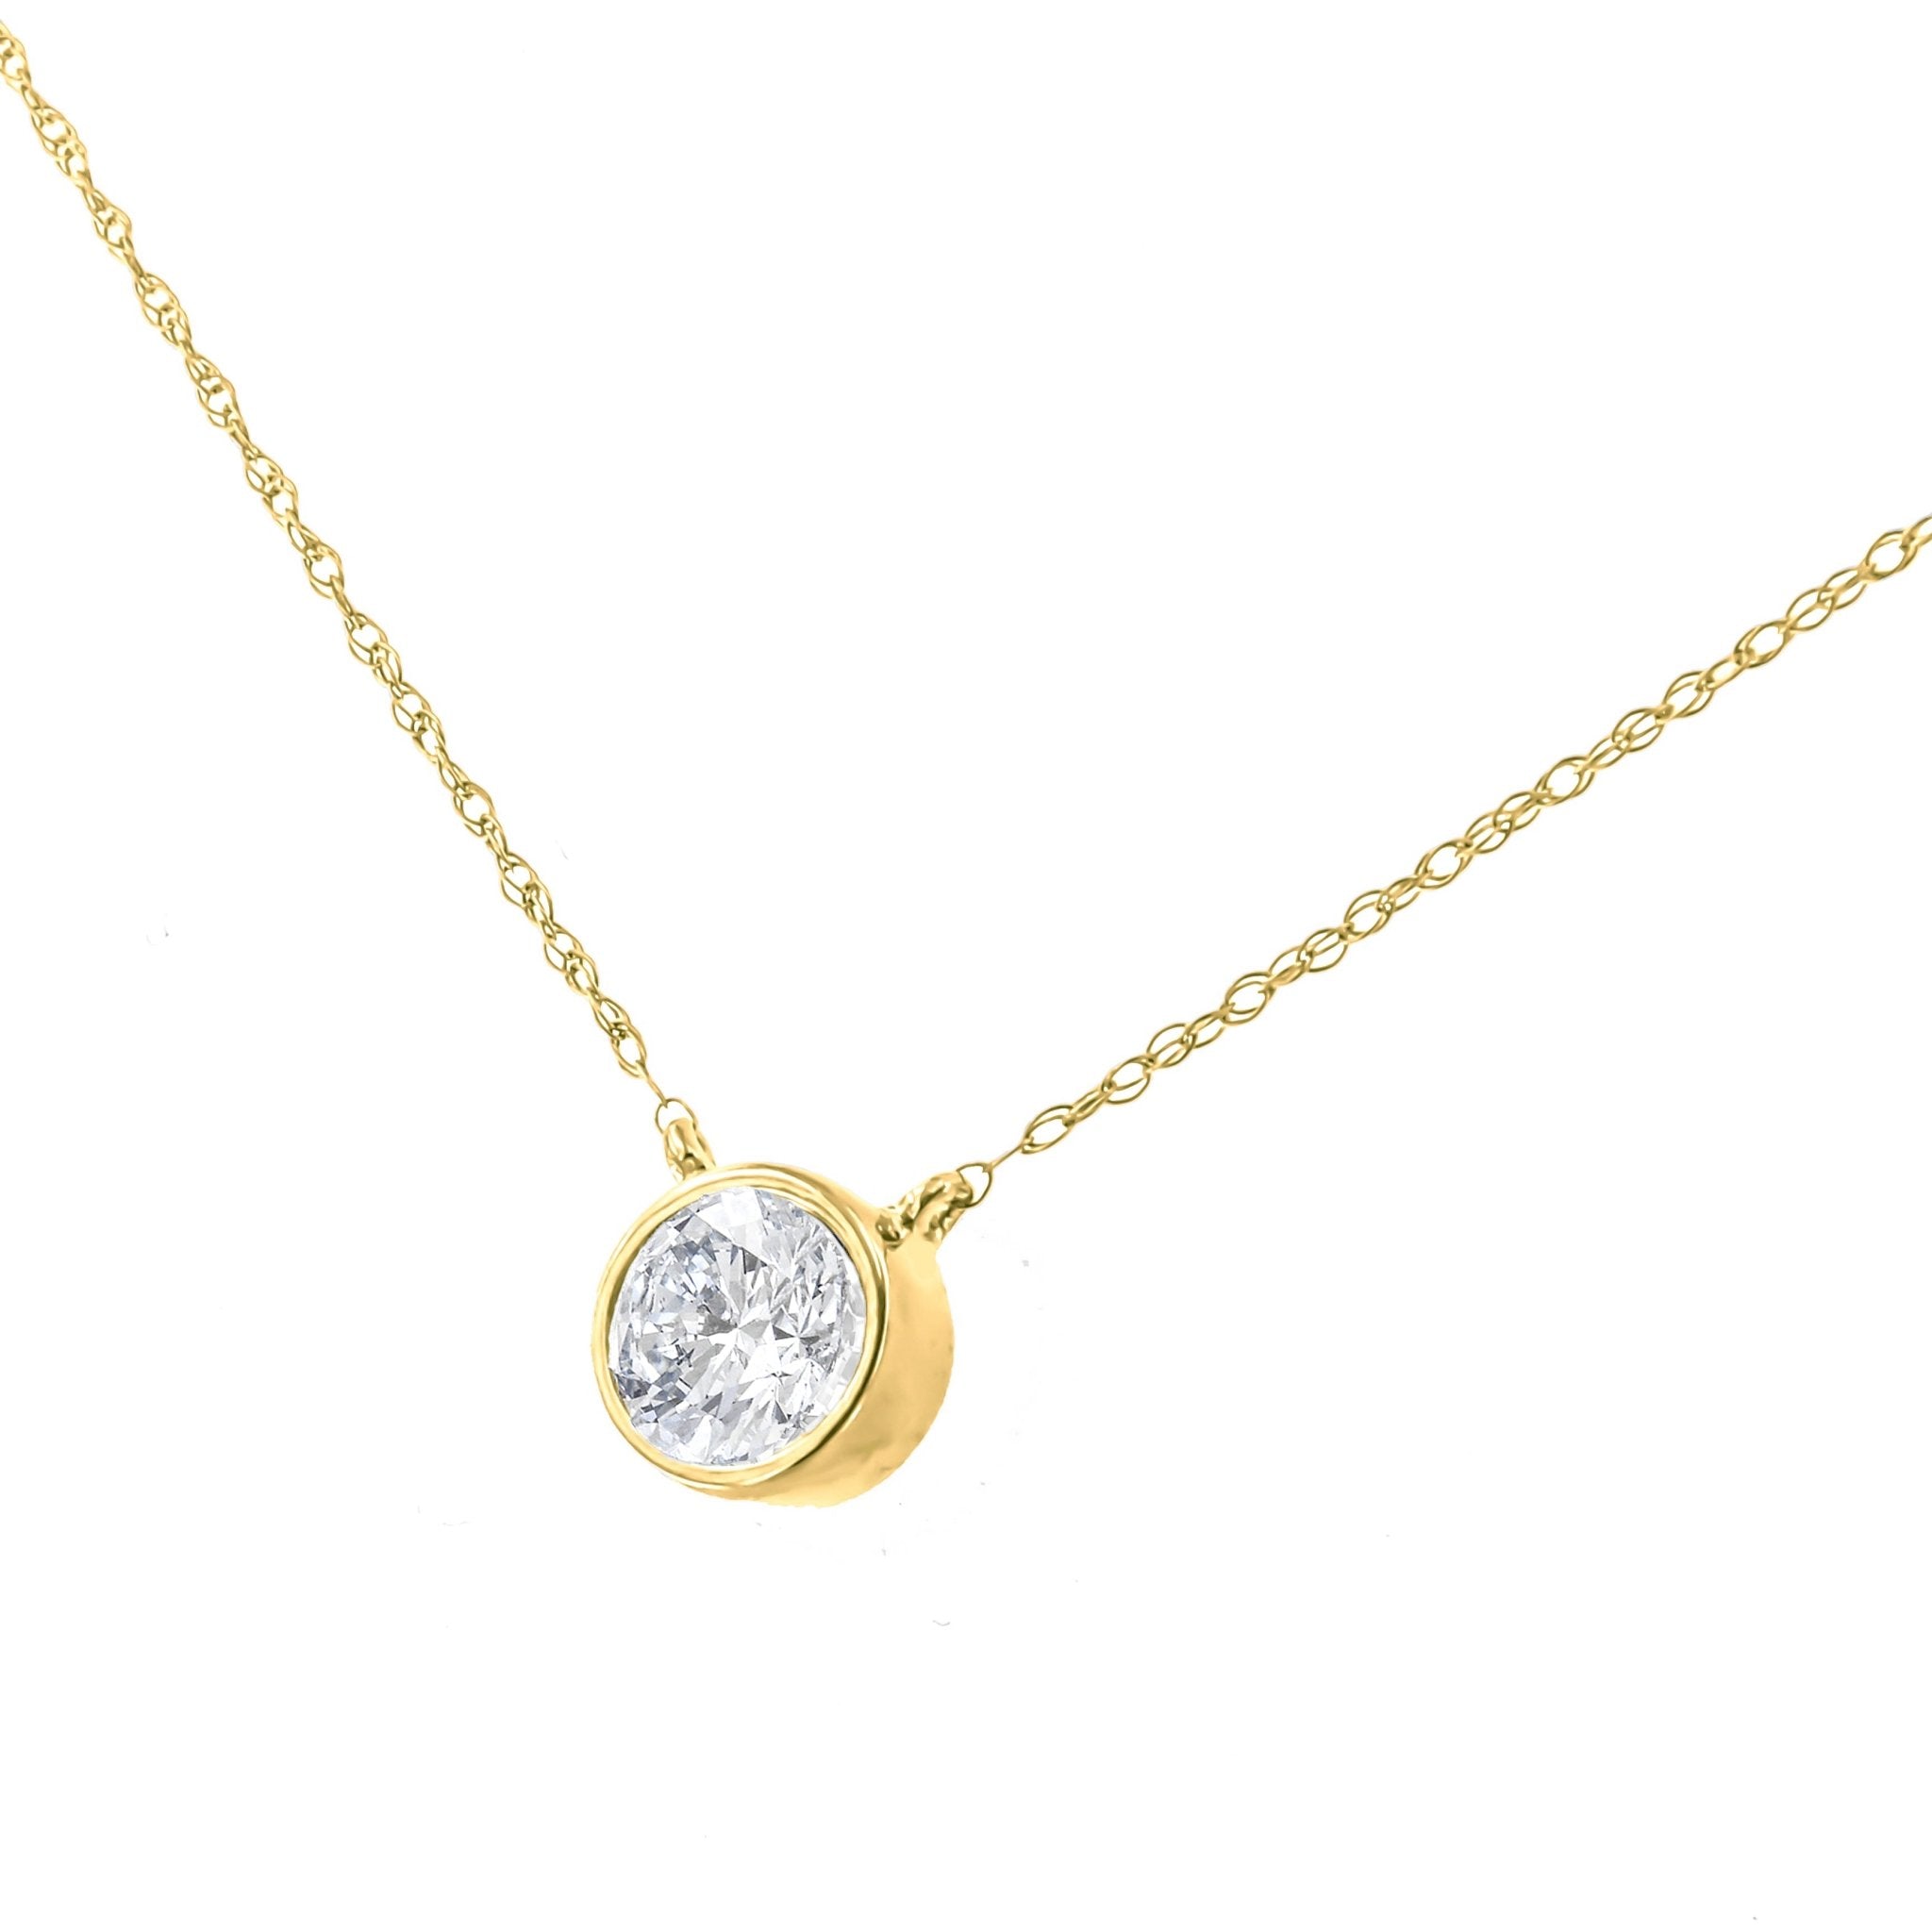 Ags-Certified-10K-Yellow-Gold-1/10-Cttw-Diamond-Solitaire-Pendant-Necklace-(G-H,-Si2-I1)-Necklaces